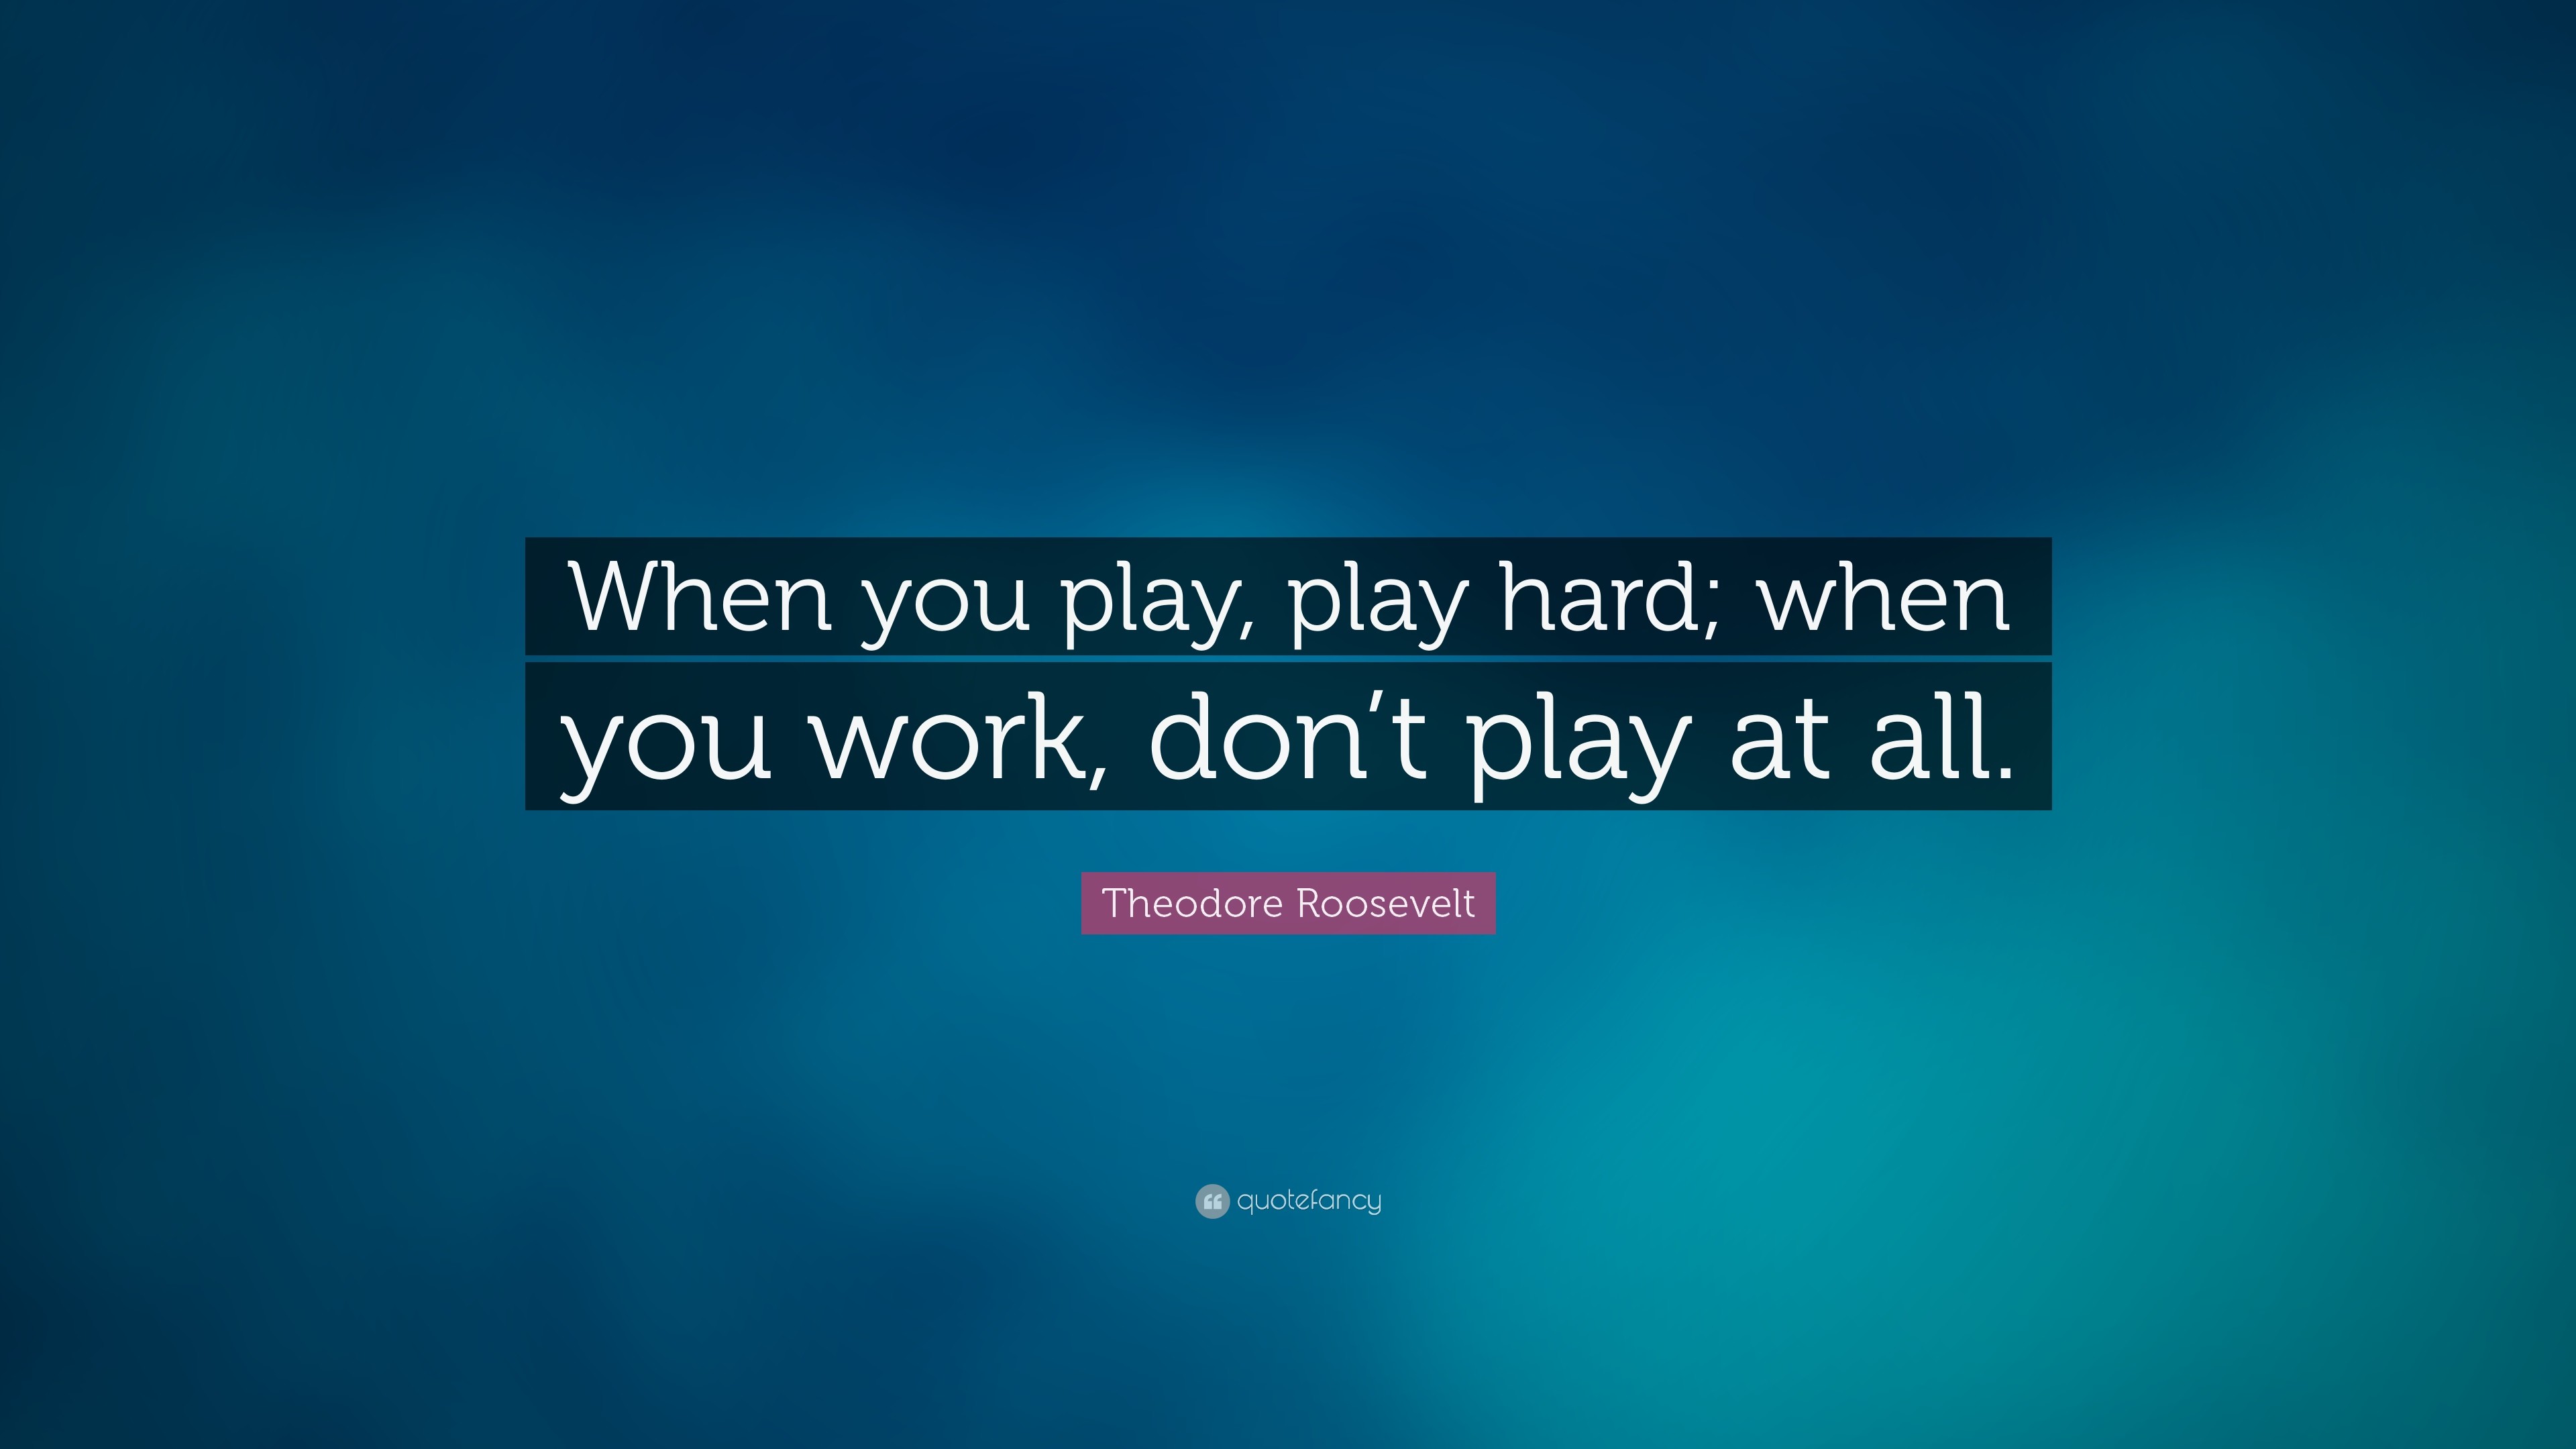 3840x2160 Theodore Roosevelt Quote: “When you play, play hard; when you work,